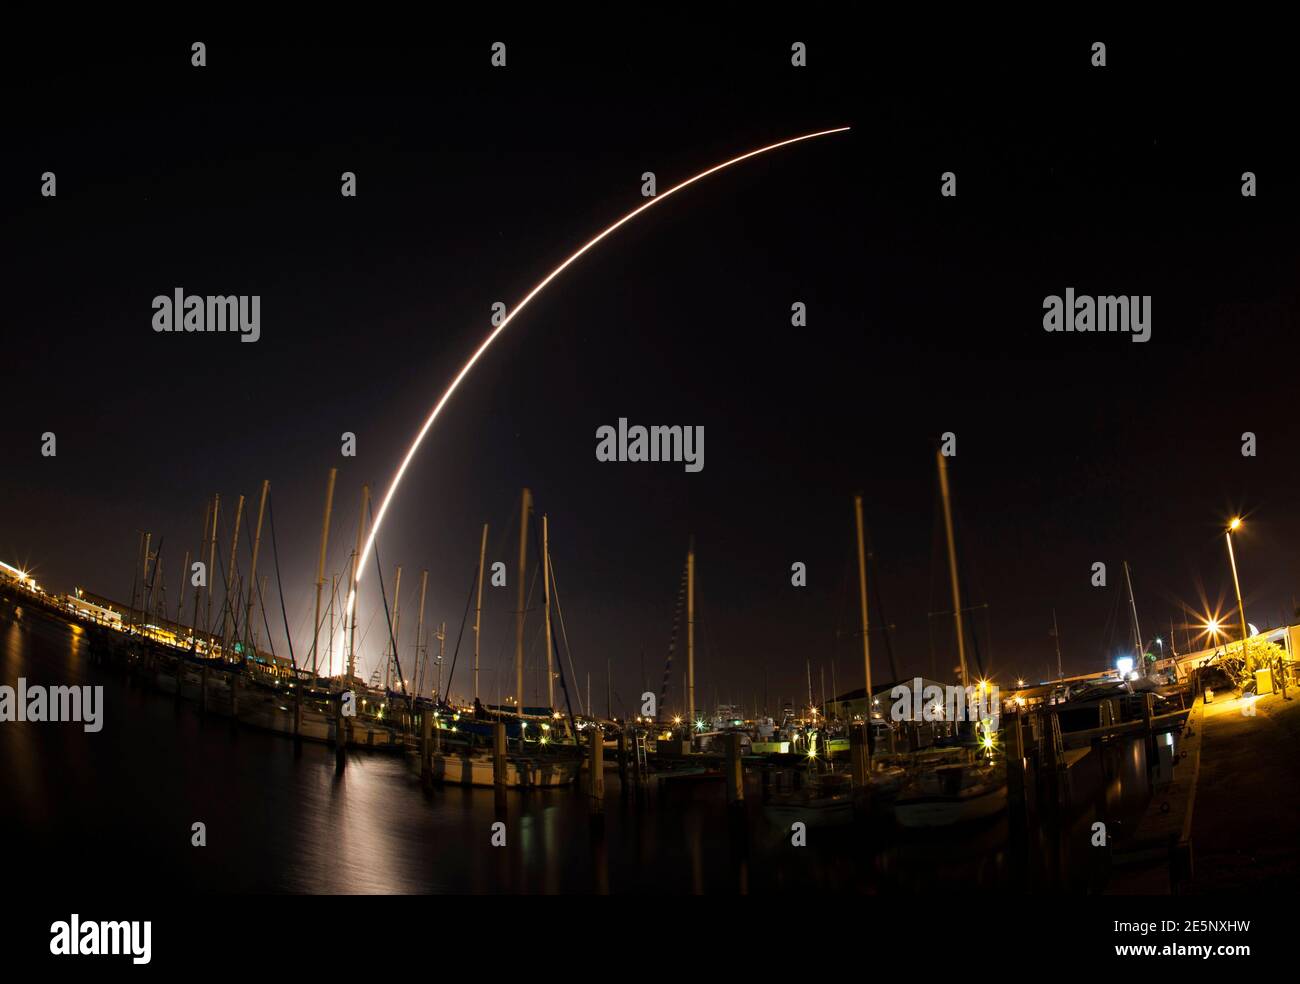 The Delta IV rocket is seen streaking across the sky after being launched from Cape Canaveral Air Force Station as pictured from Port Canaveral, Florida February 20, 2014. The U.S. Global Positioning System satellite was launched into orbit on Thursday, buttressing a 31-member navigation network in constant use by the military, civilian agencies and commercial customers worldwide. The satellite, built by Boeing, was carried into space aboard an unmanned Delta IV rocket, which blasted off from Cape Canaveral Air Force Station in Florida at 8:59 p.m. EST/0159 Friday GMT. Picture taken with long  Stock Photo